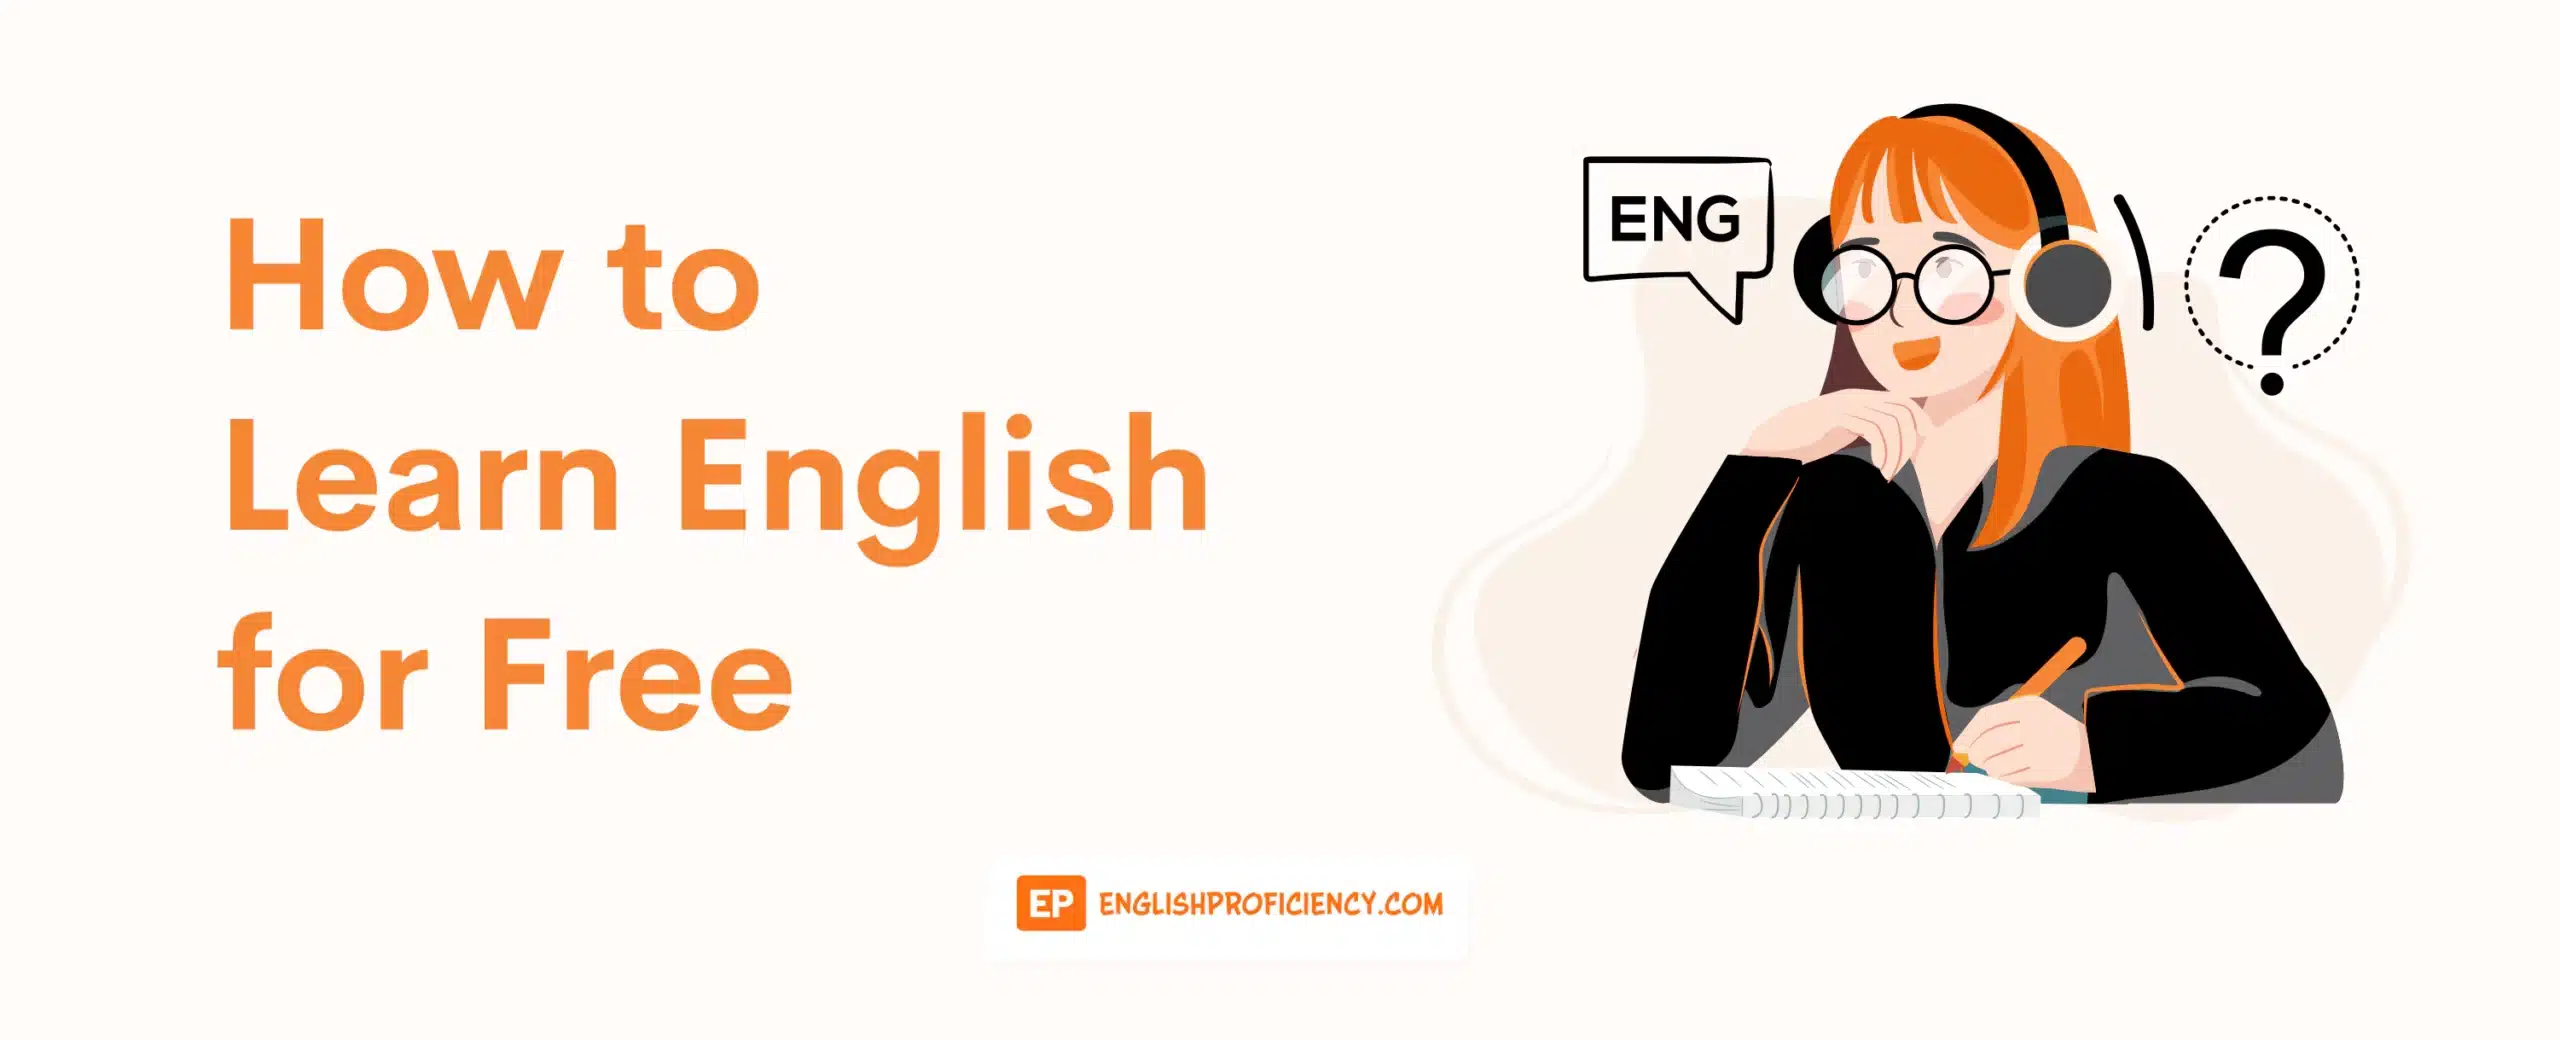 How to Learn English for Free